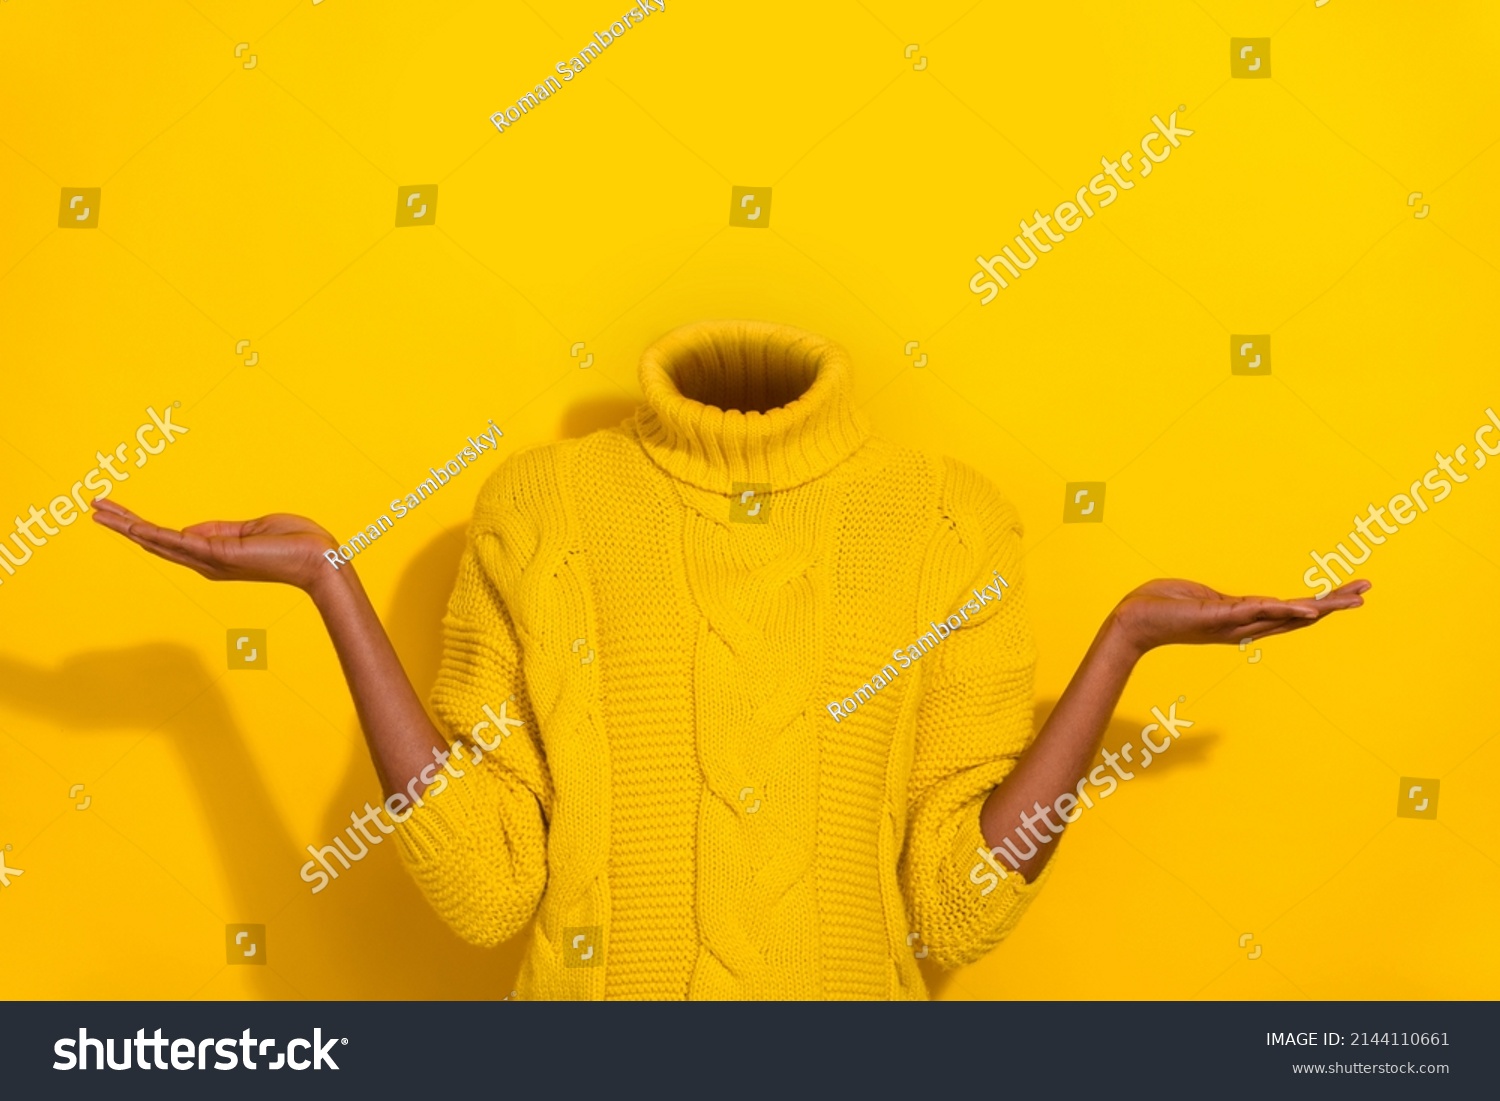 Conceptual photo image headless girl portrait raise two arms demonstrating novelty promotion no emotions just business isolated on yellow background #2144110661